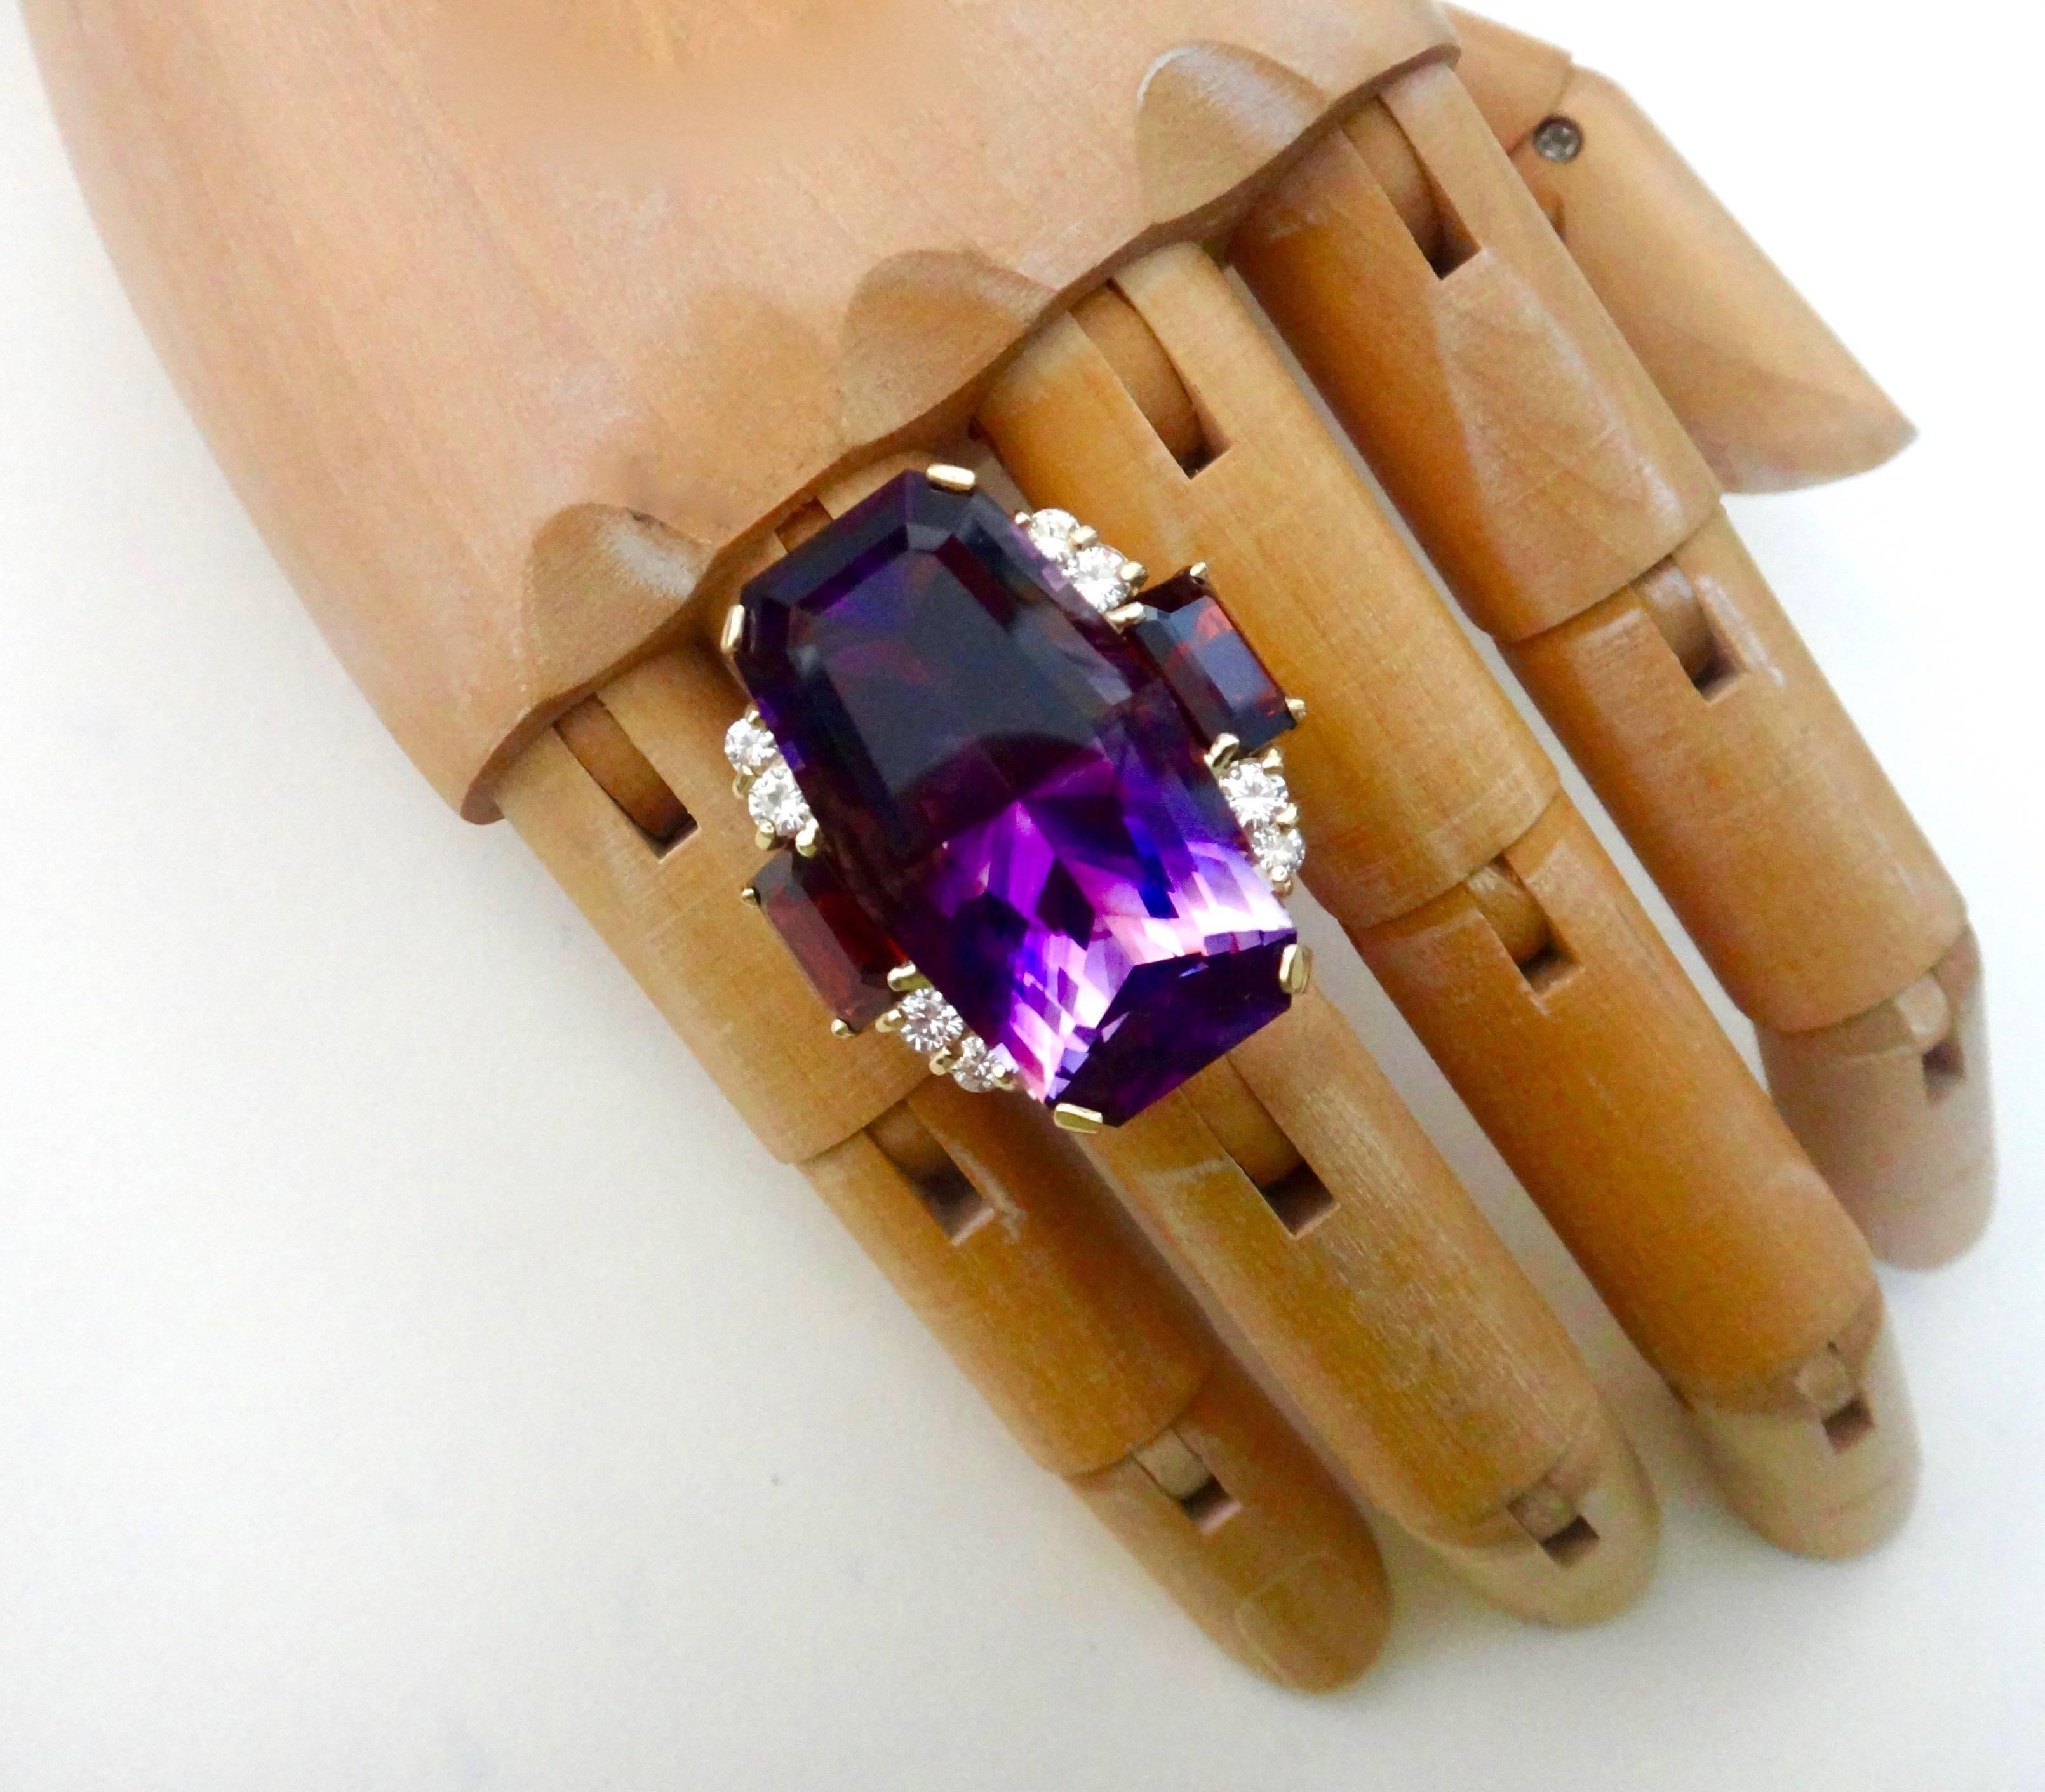 A dramatic ten sided amethyst by master gem cutter Jerry Newman is featured in this bold cocktail ring.  This is a perfect example of how important the cut is in a finished gem.  The amethyst is heavily zoned (bands of dark and light color) typical